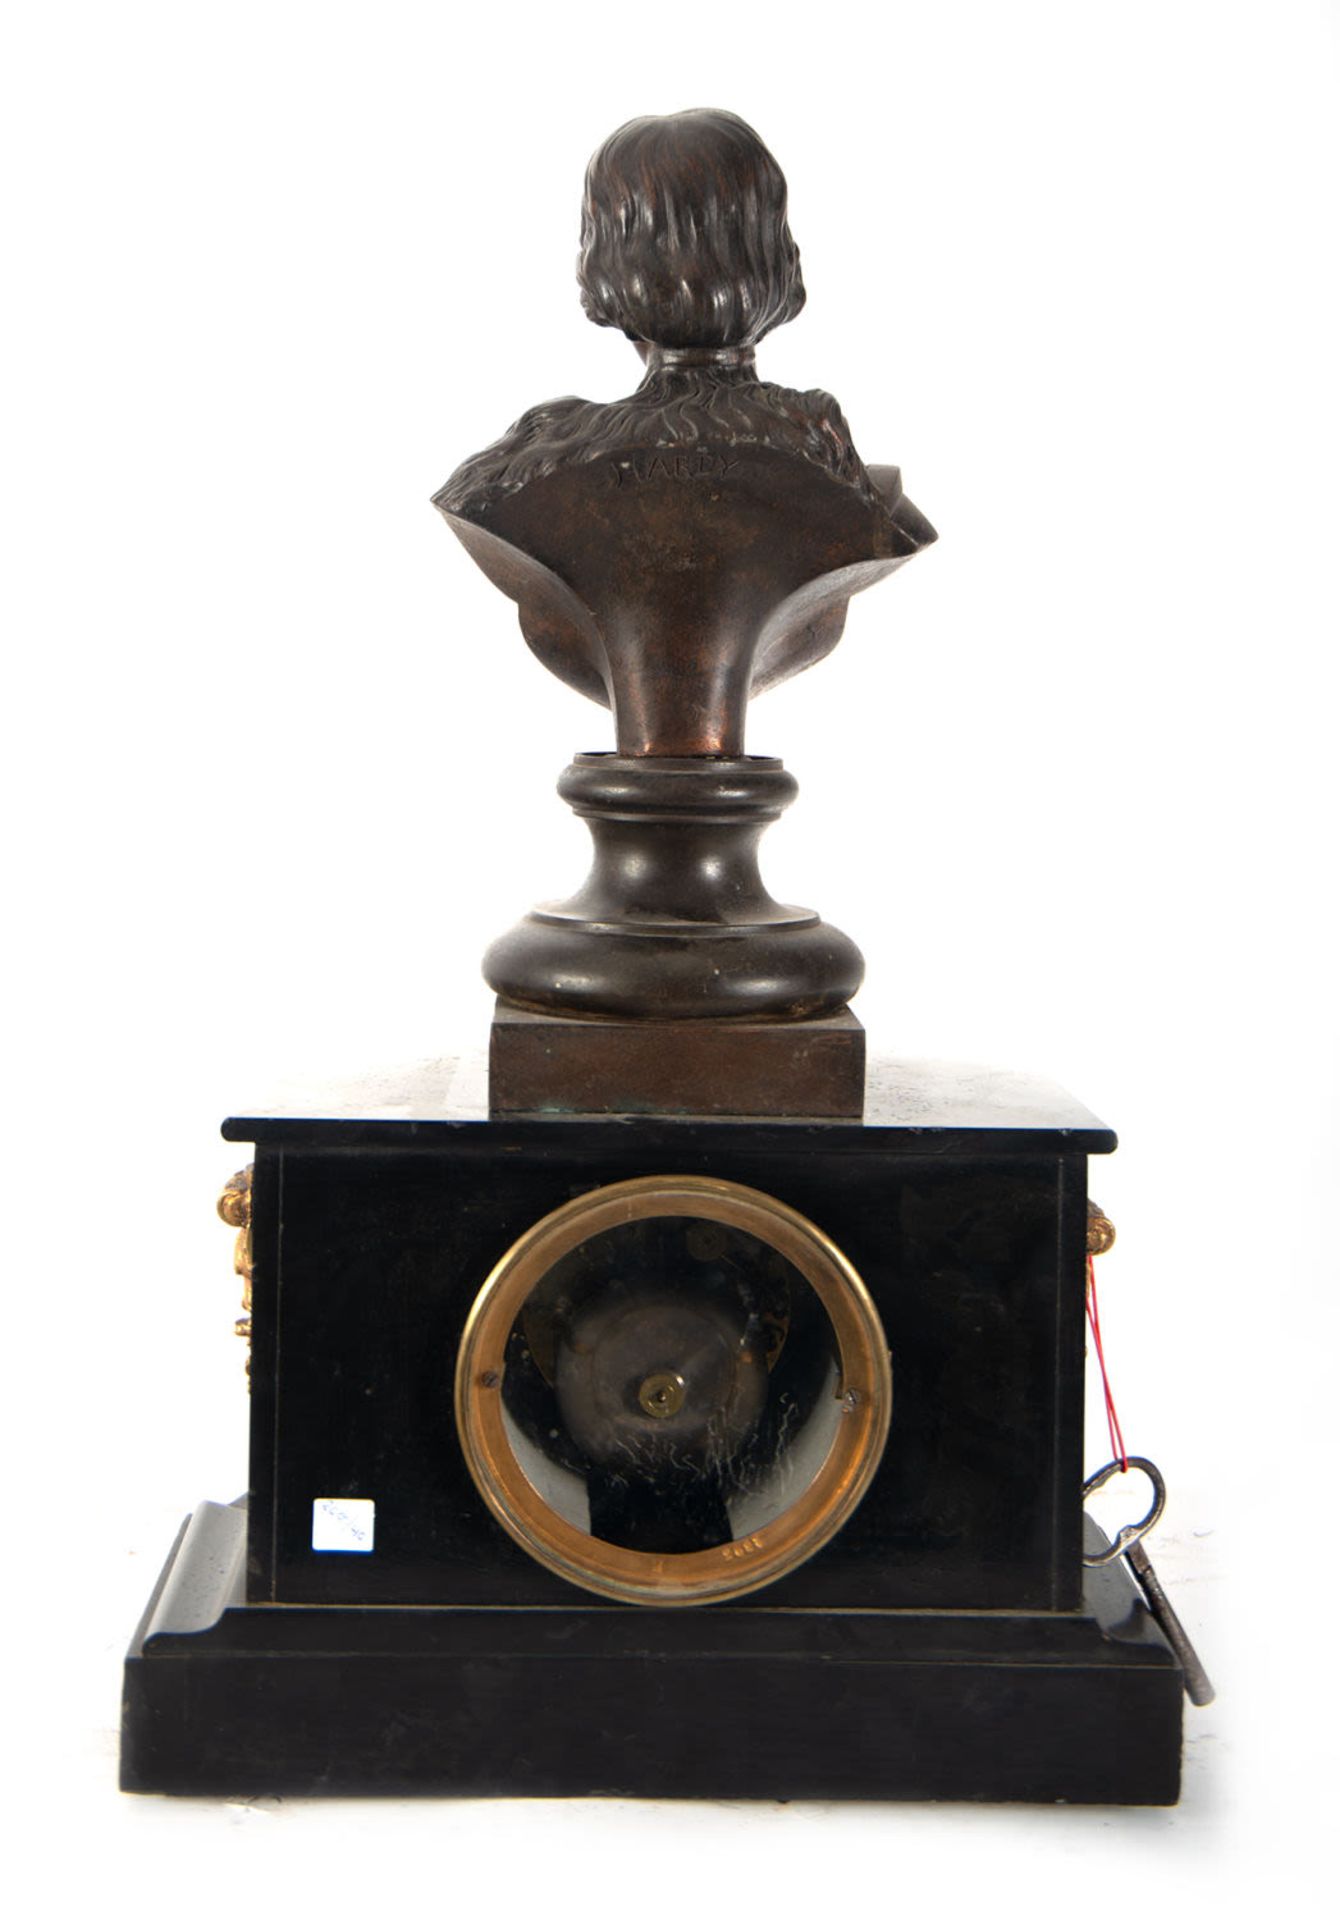 Mantel Clock with Bust of Joan of Arc, 19th Century - Image 6 of 6